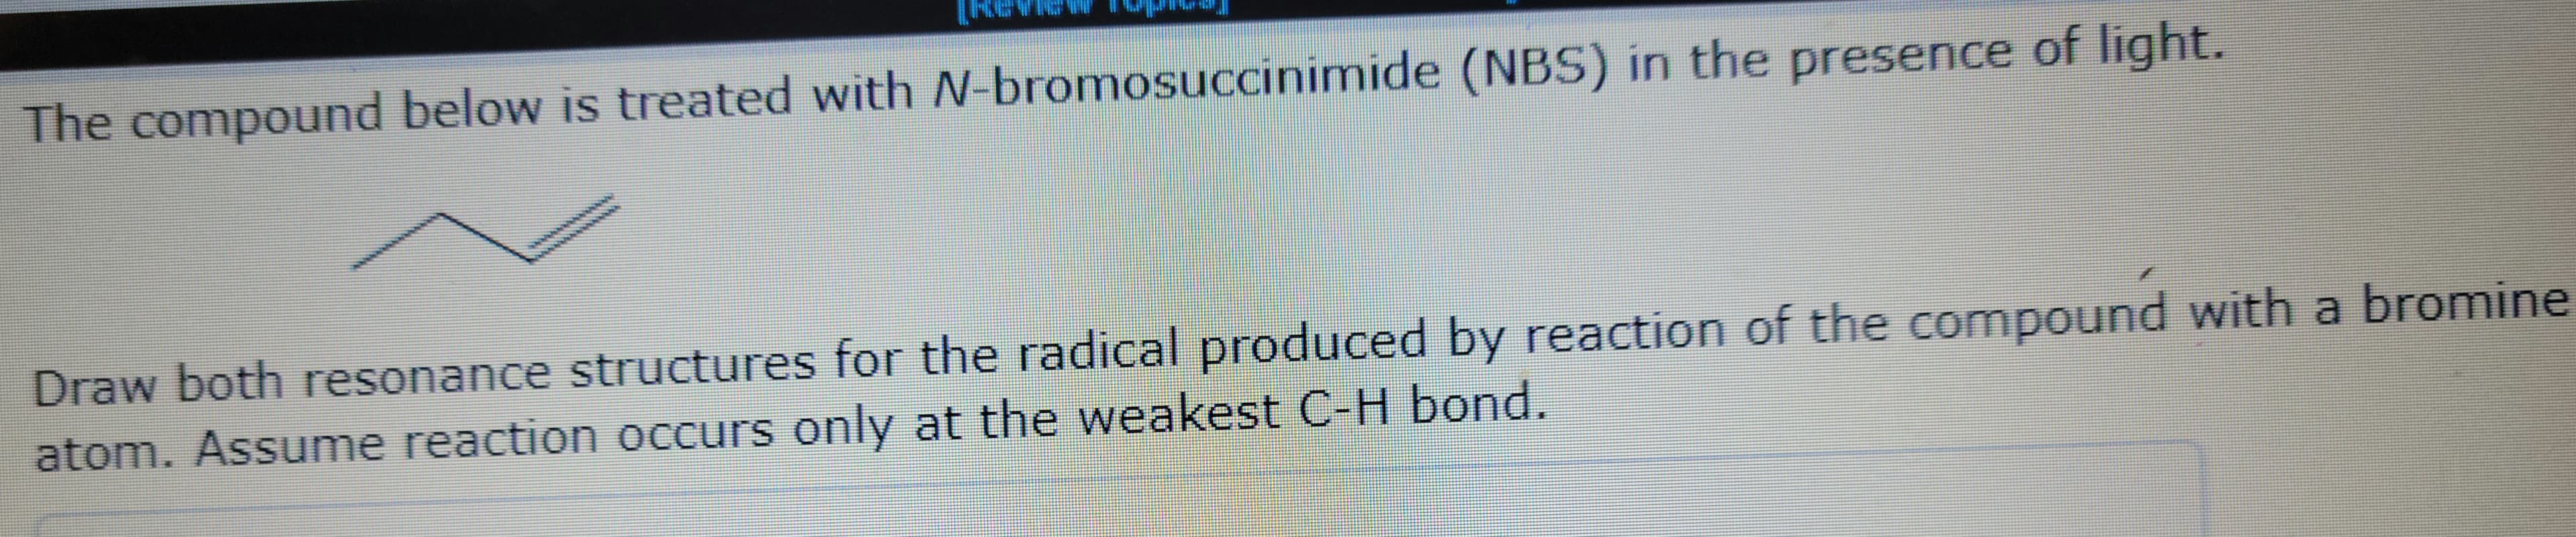 The compound below is treated with N-bromosuccinimide (NBS) in the presence of light.
Draw both resonance structures for the radical produced by reaction of the compound with a bromine
atom. Assume reaction occurs only at the weakest C-H bond.